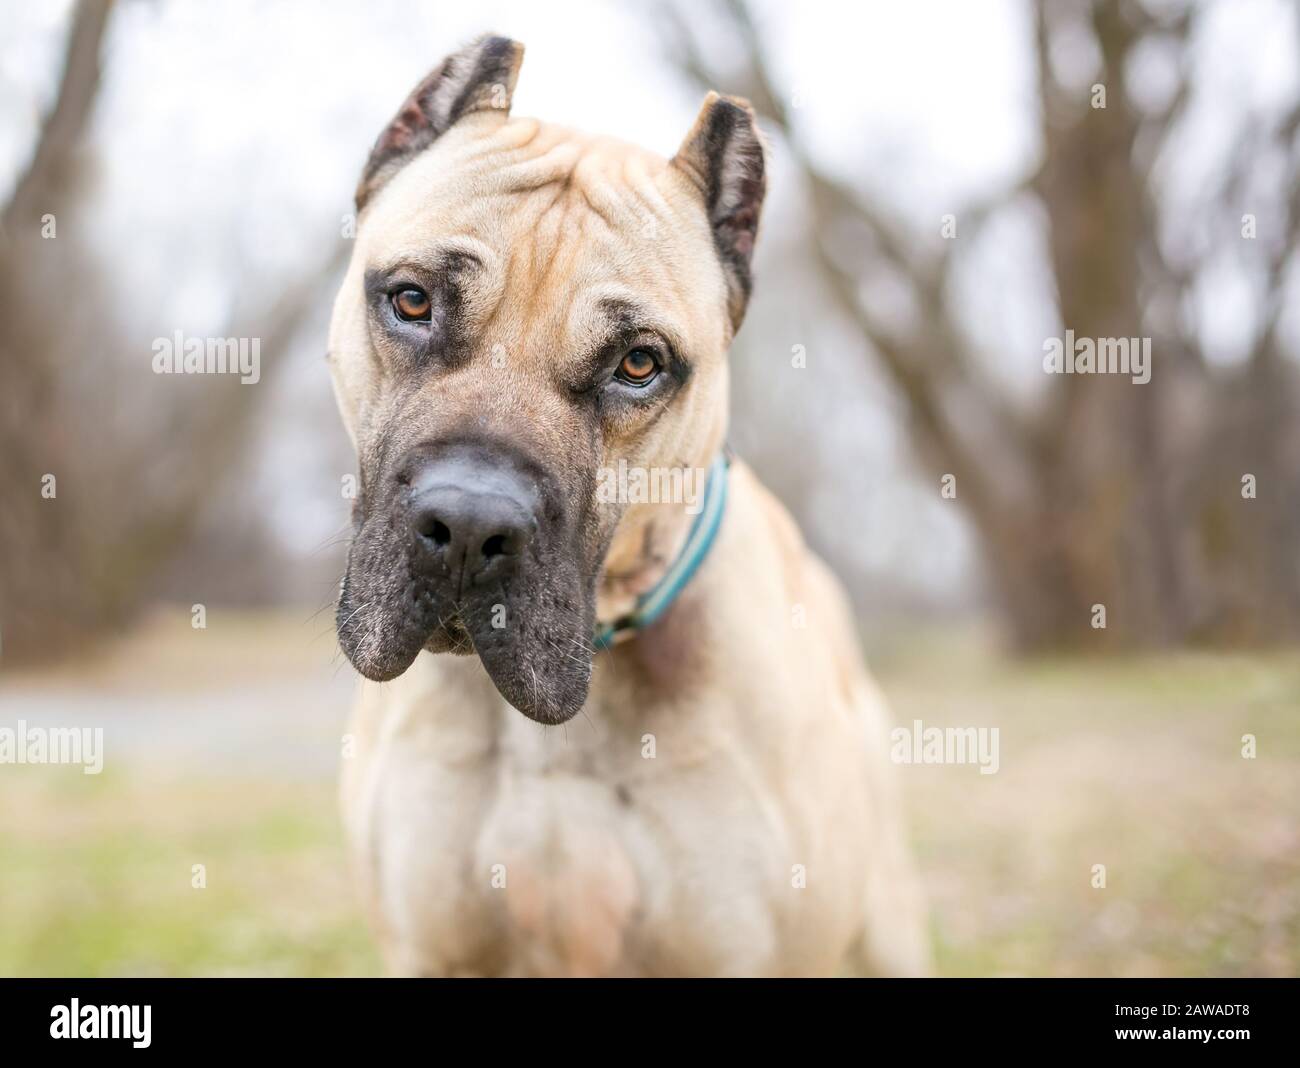 A fawn colored Cane Corso mastiff dog with cropped ears, listening with a head tilt Stock Photo